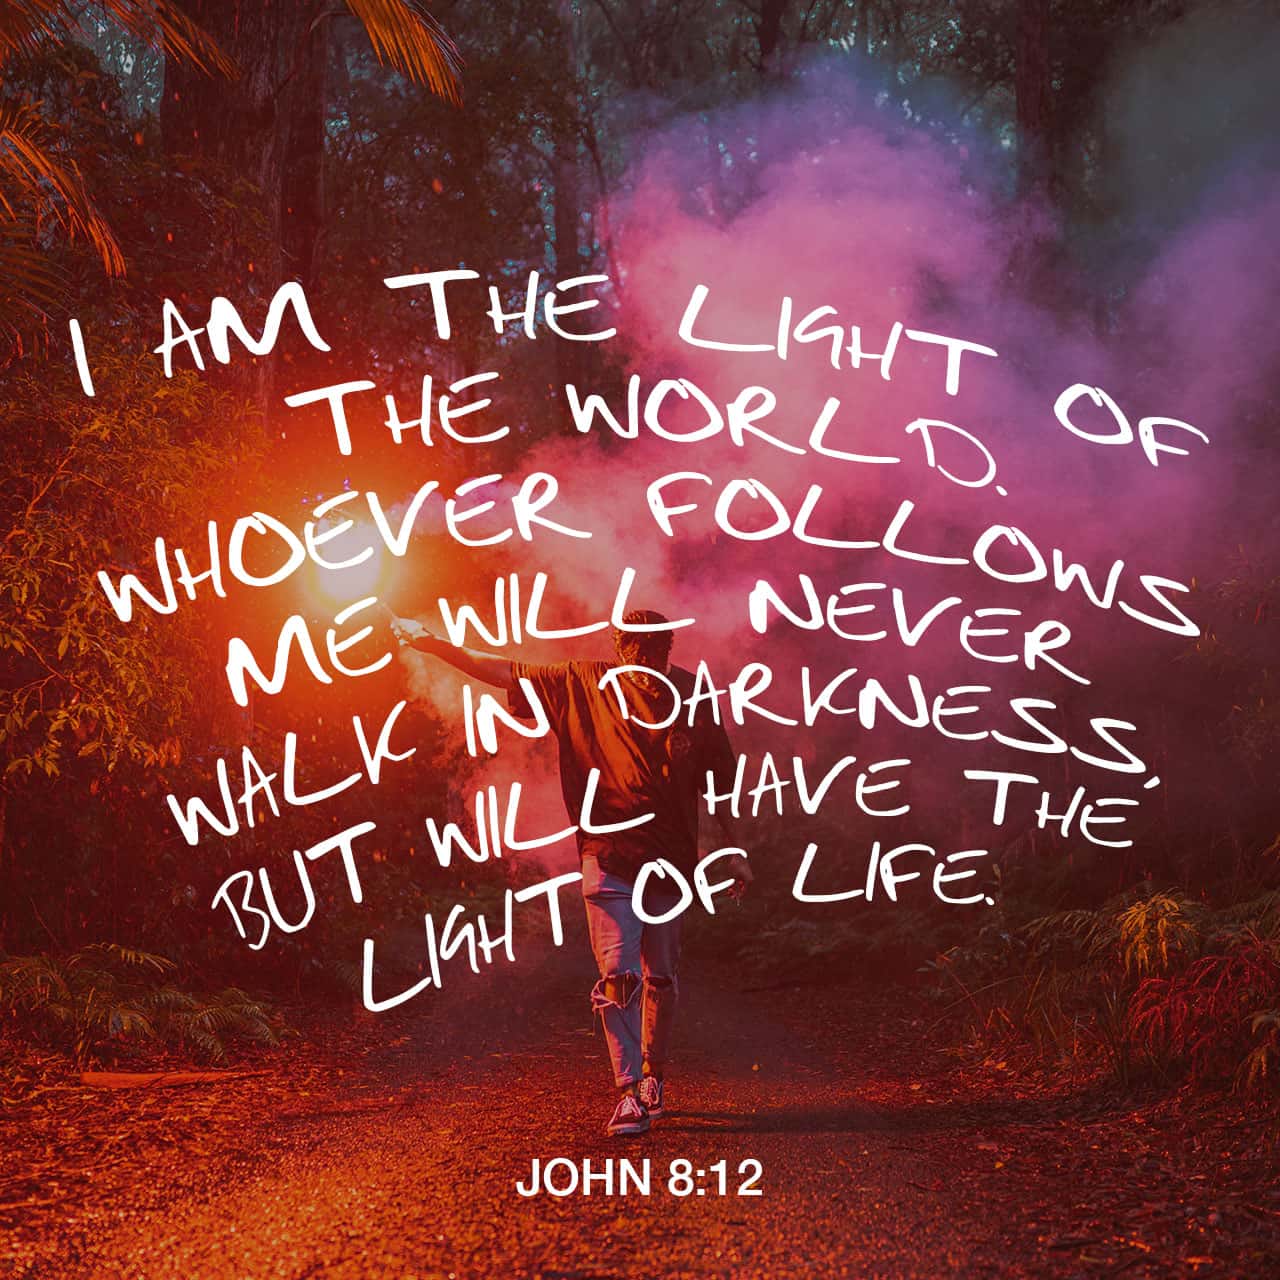 last Periodisk dvs. John 8:12 When Jesus spoke again to the people, he said, “I am the light of  the world. Whoever follows me will never walk in darkness, but will have  the light of